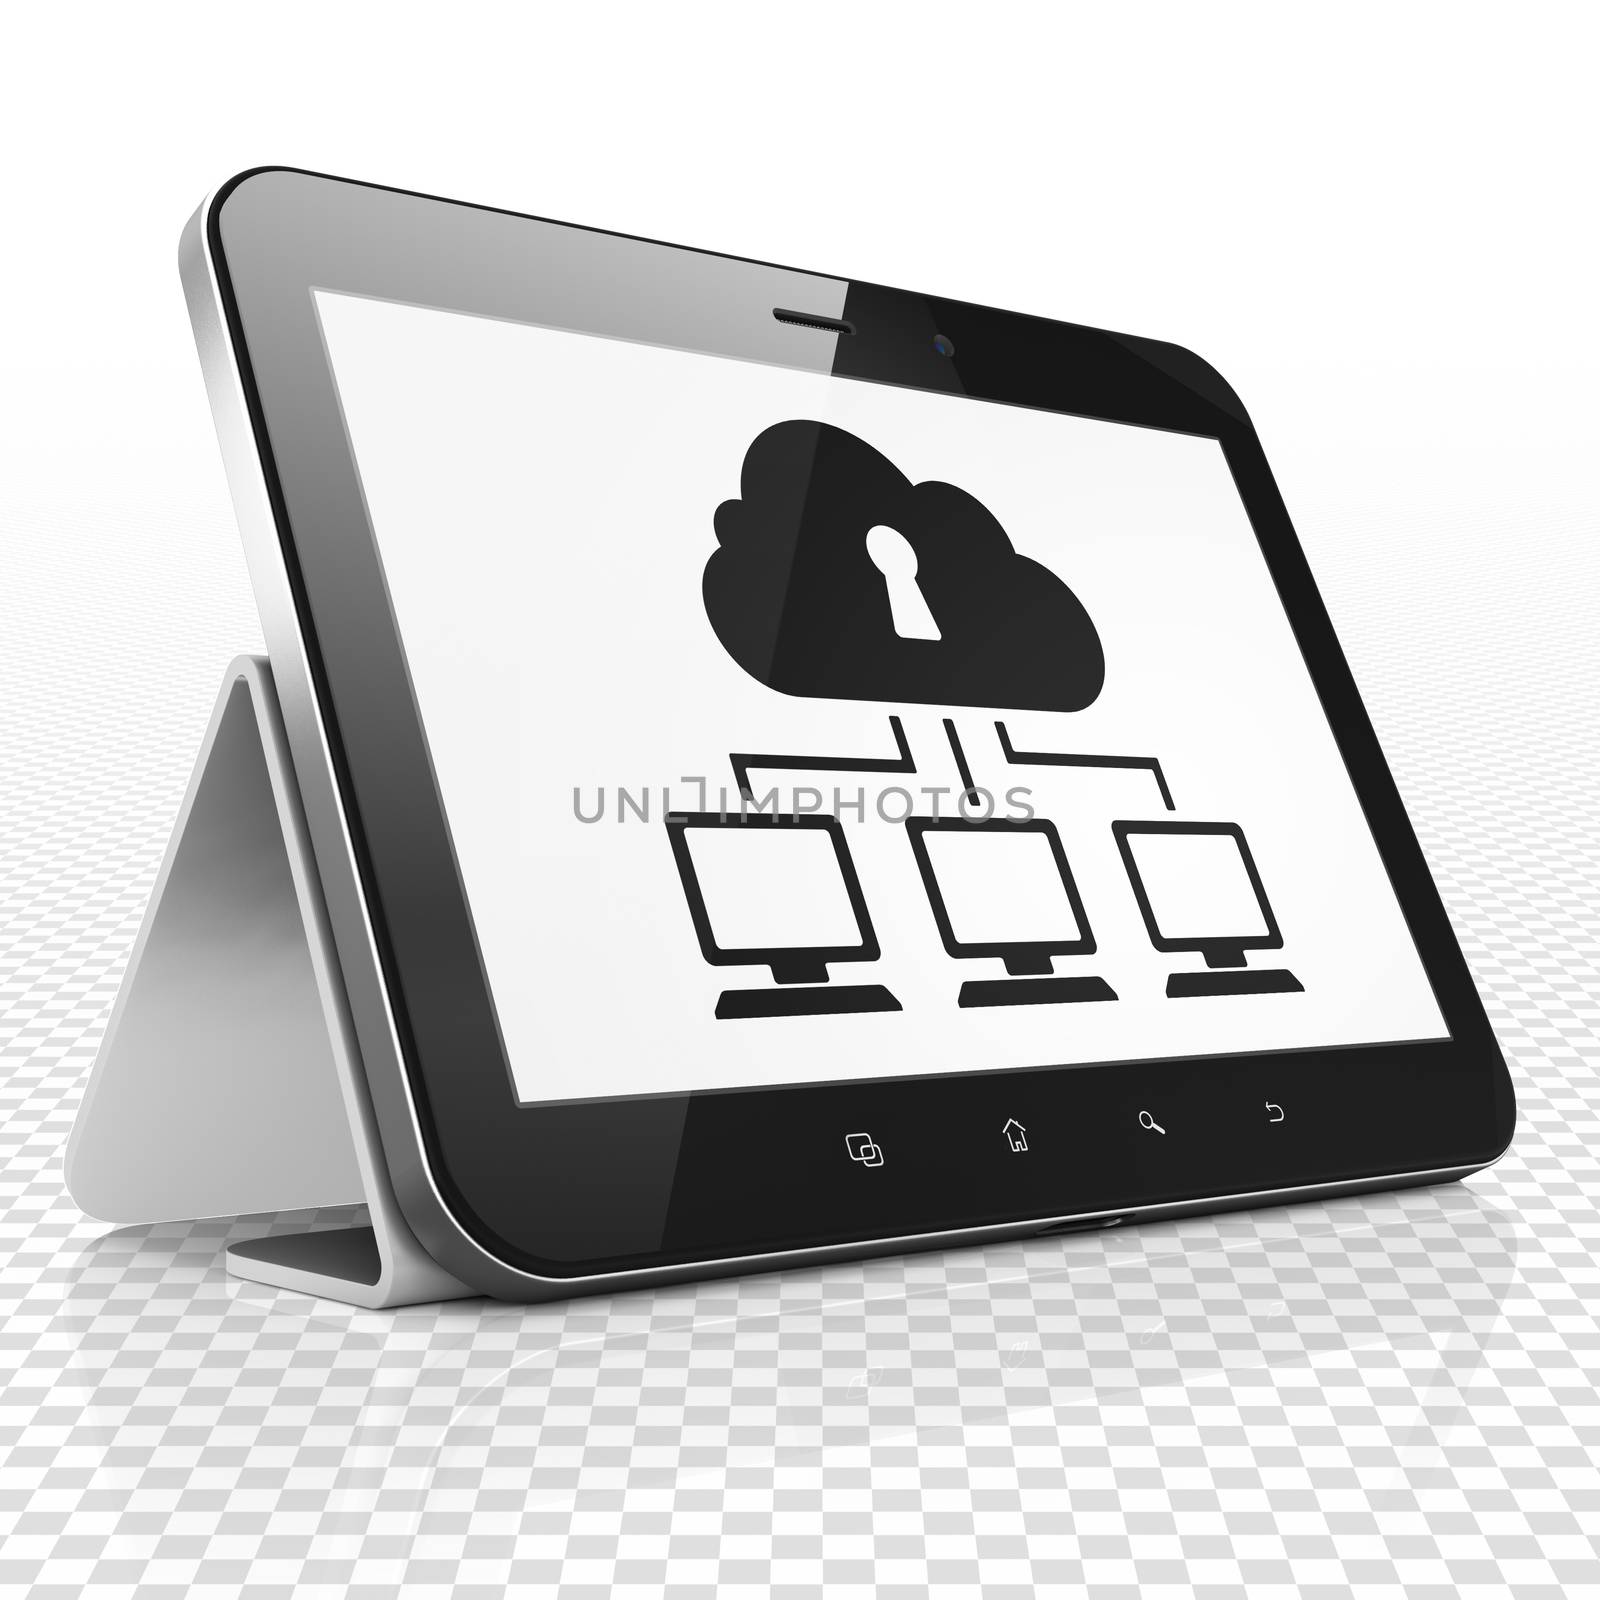 Privacy concept: Tablet Computer with black Cloud Network icon on display